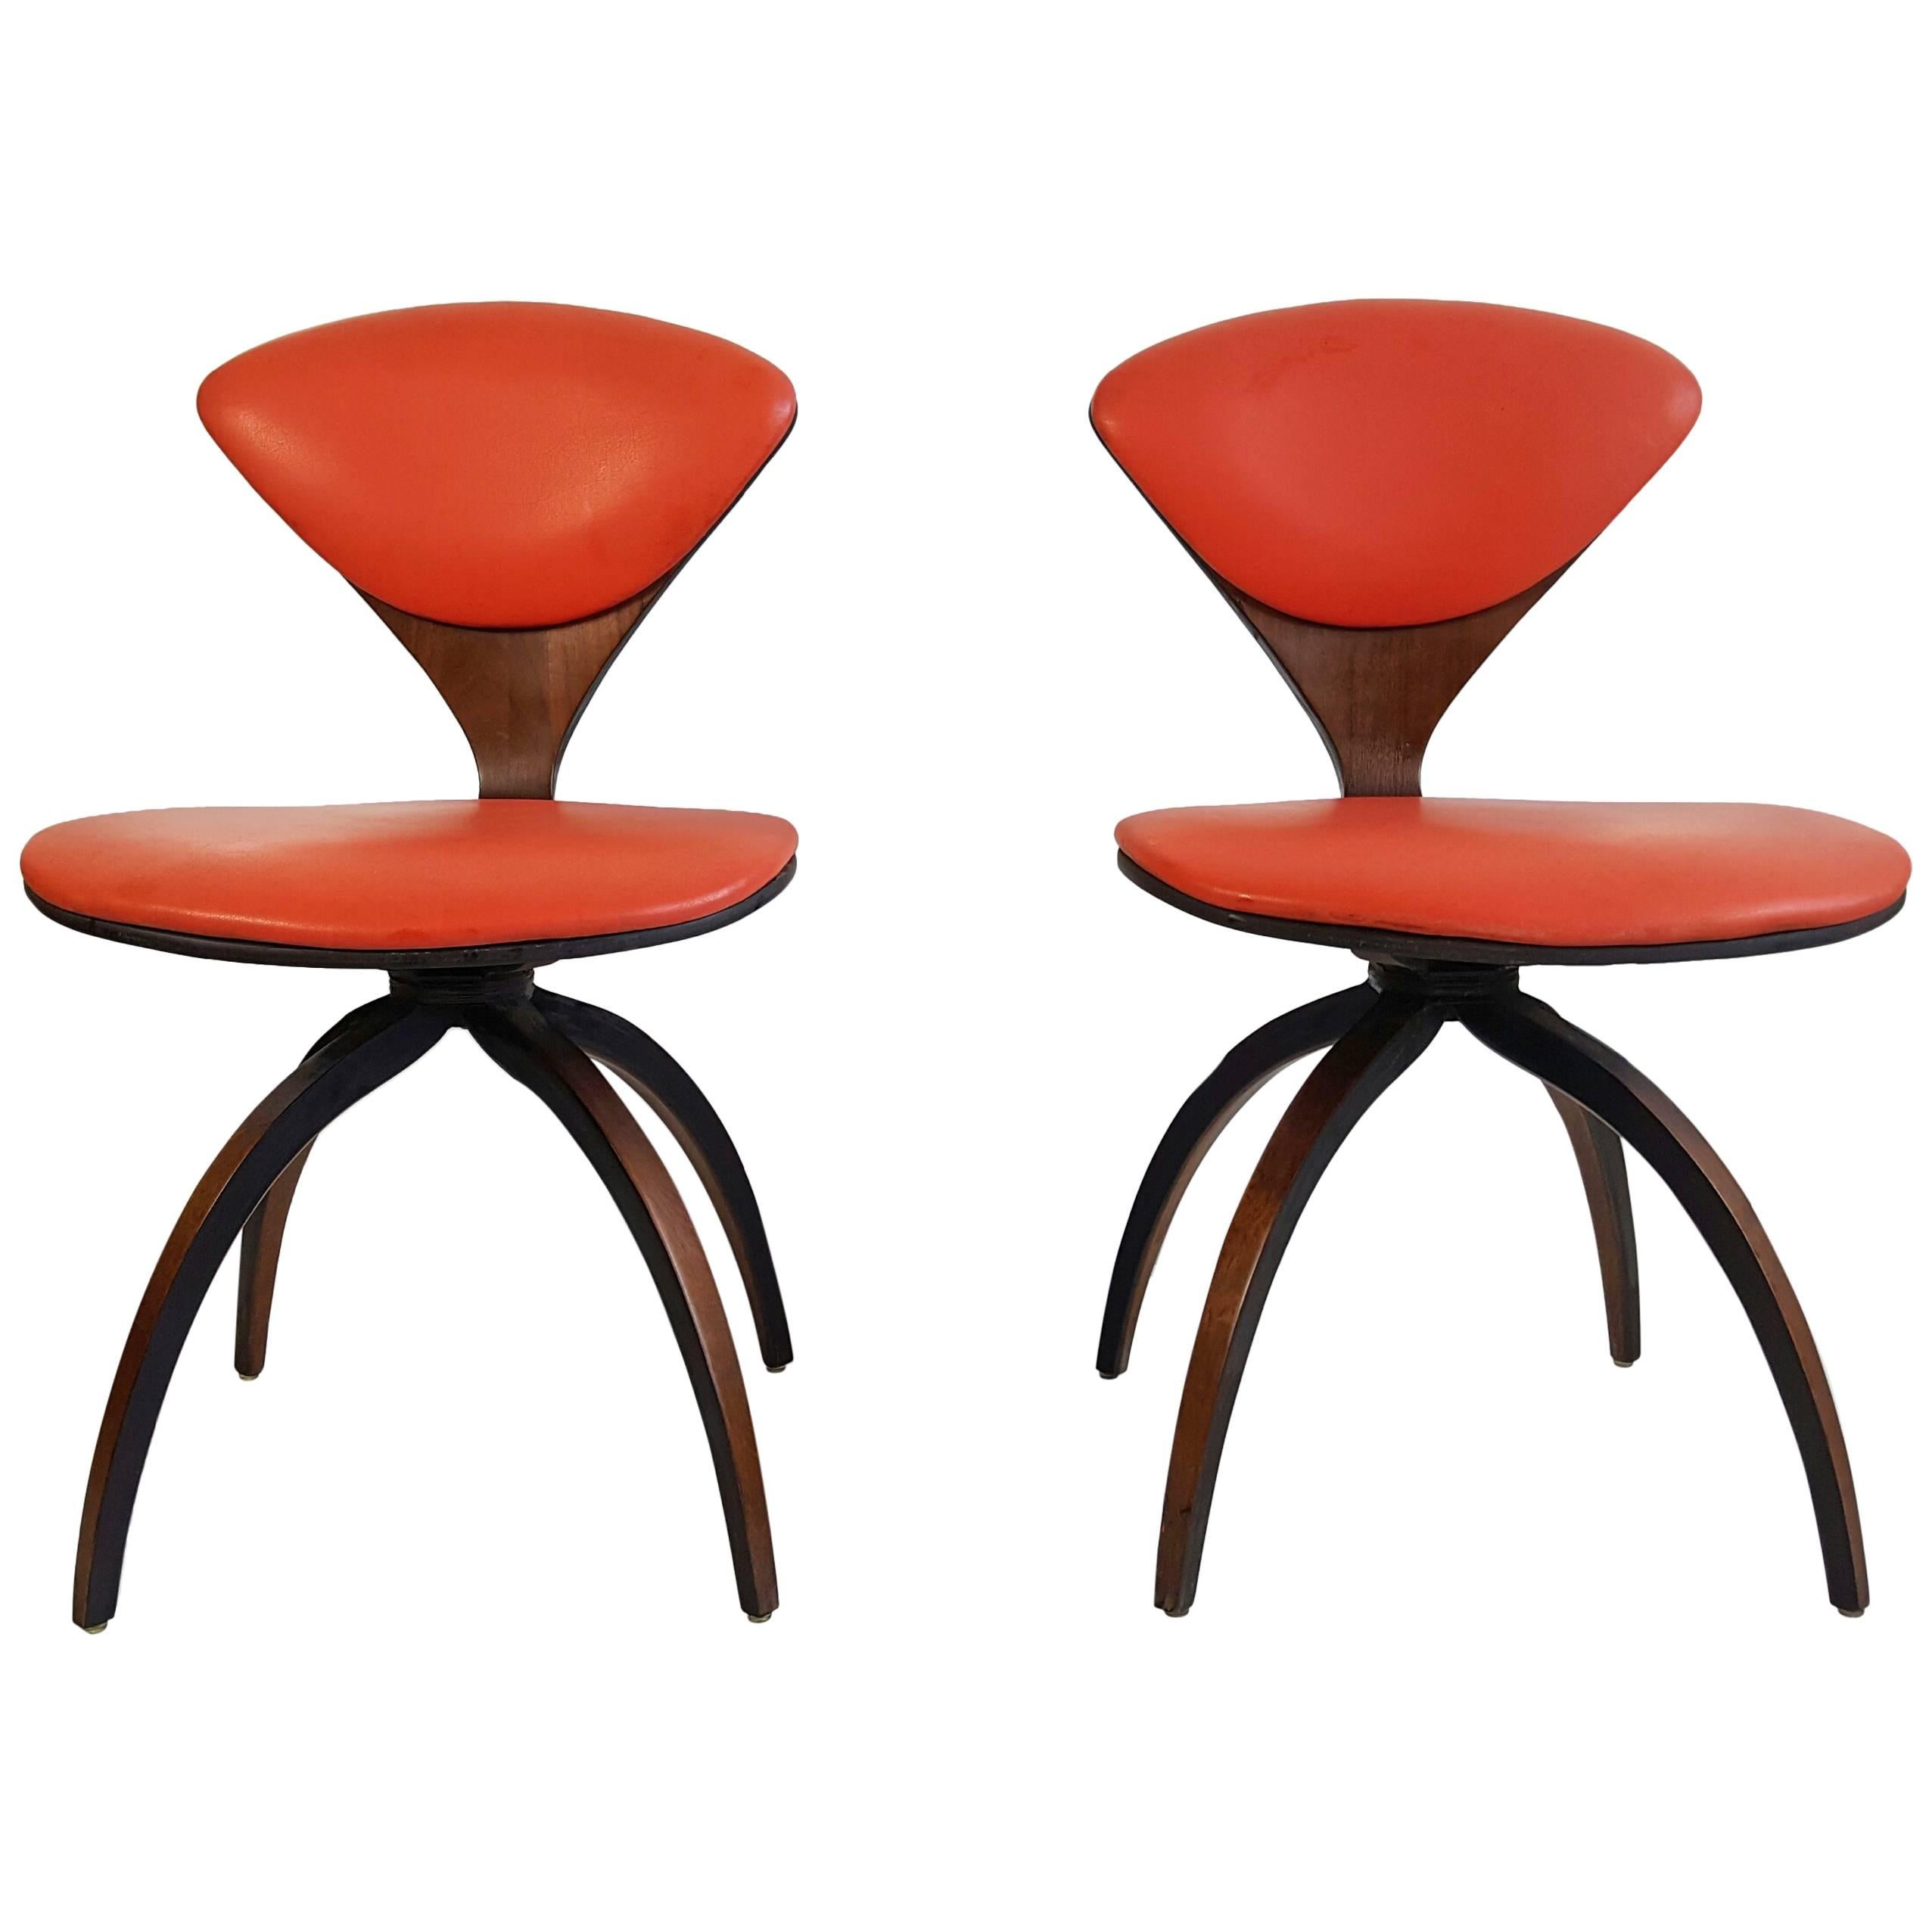 Pair of Norman Cherner Swivel Chairs for Plycraft, American, circa 1959